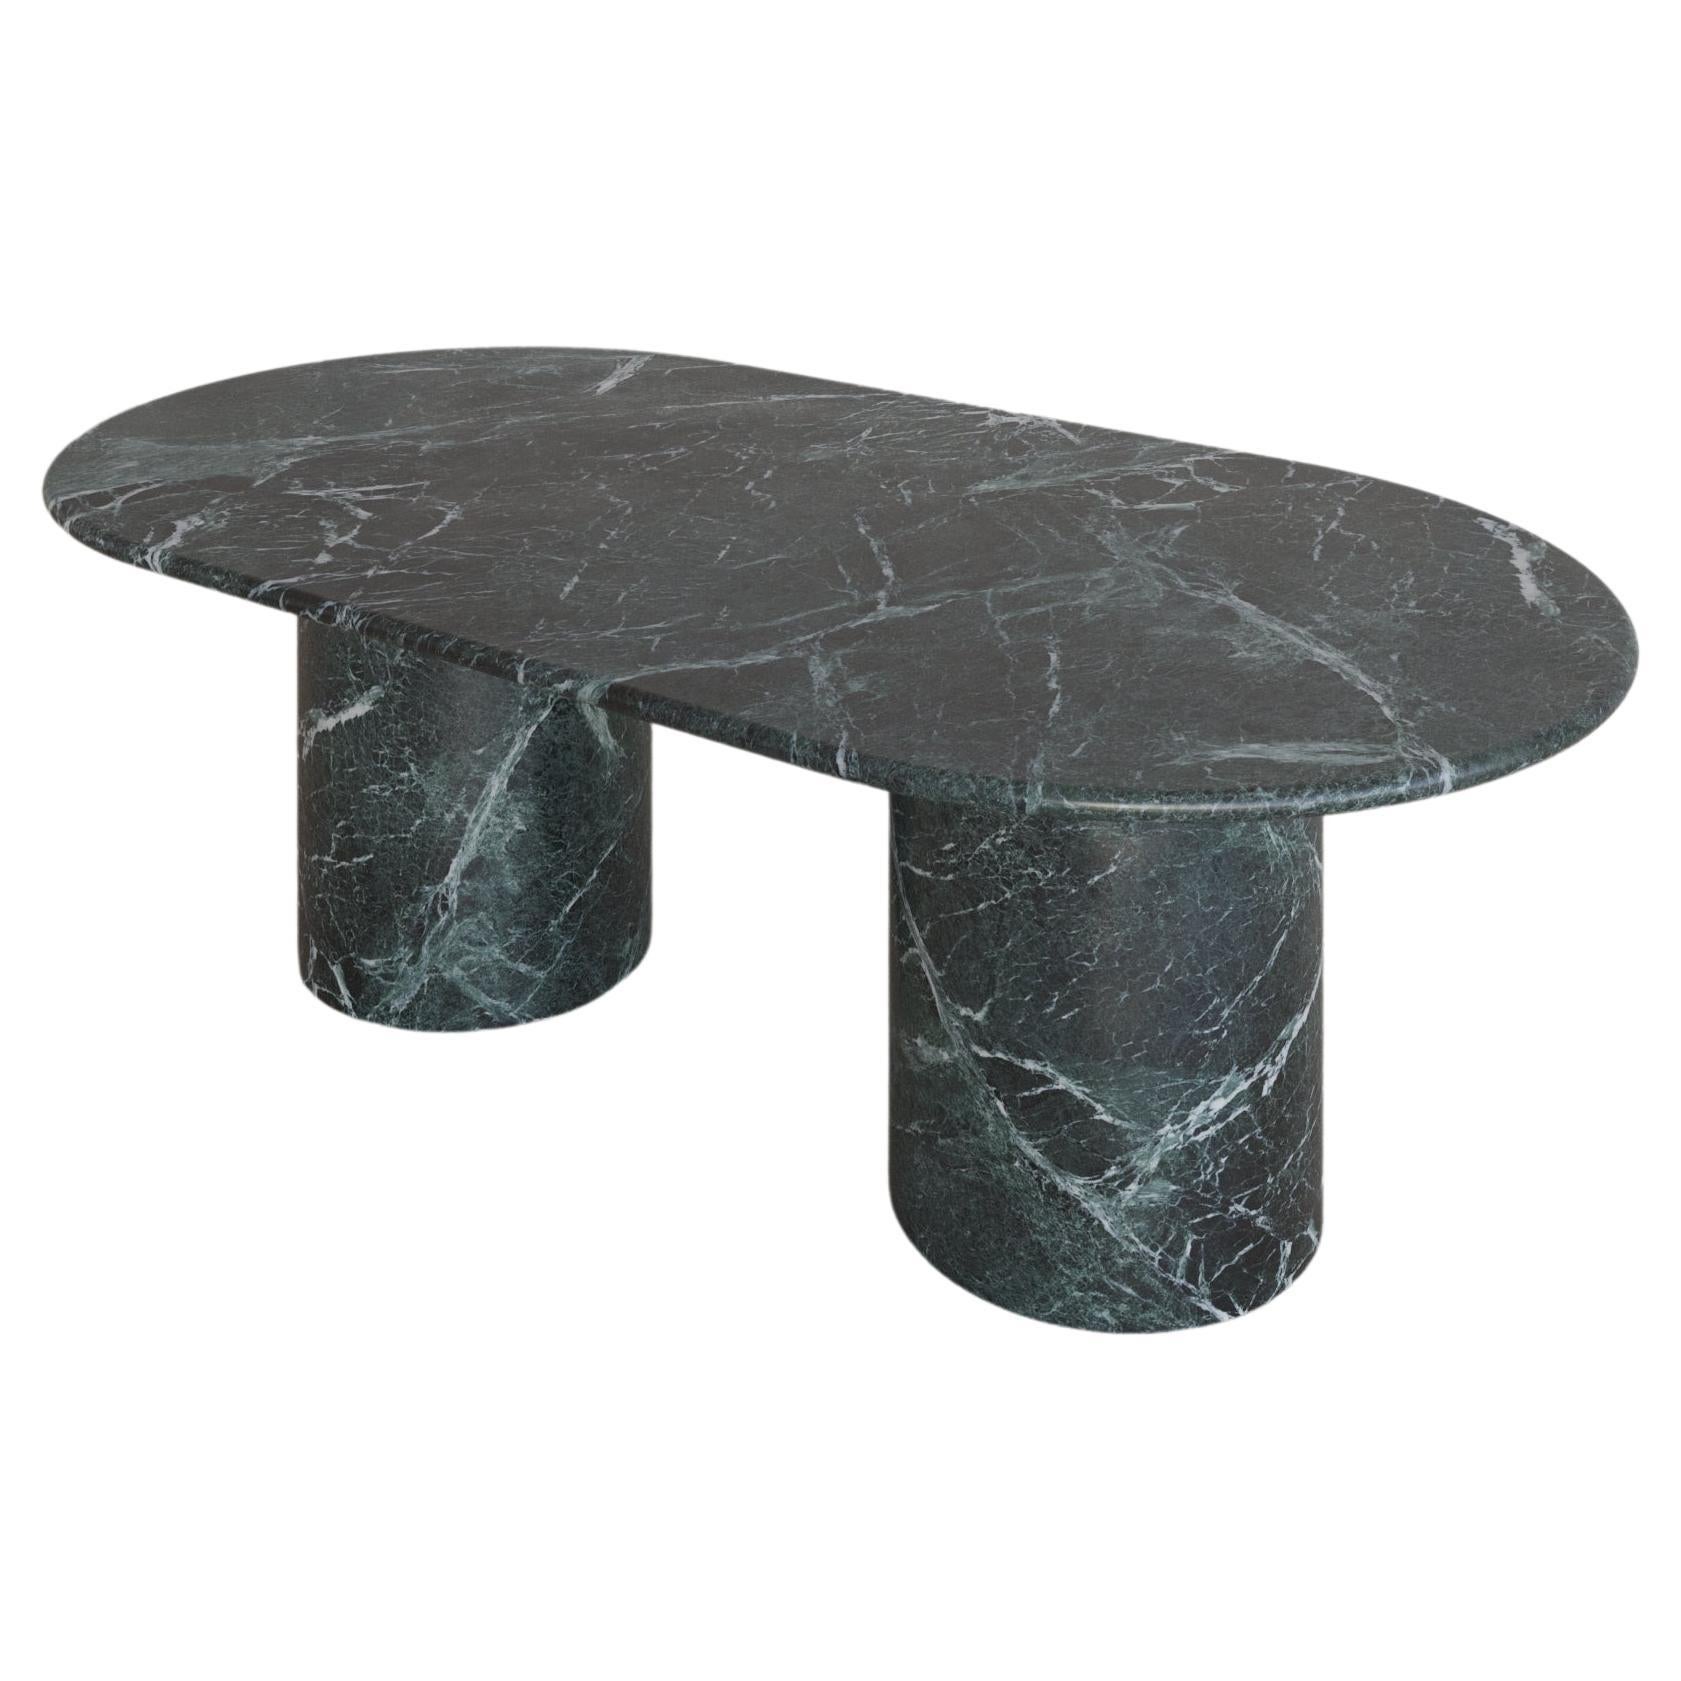 Verde Alpi Voyage Coffee Table i by the Essentialist